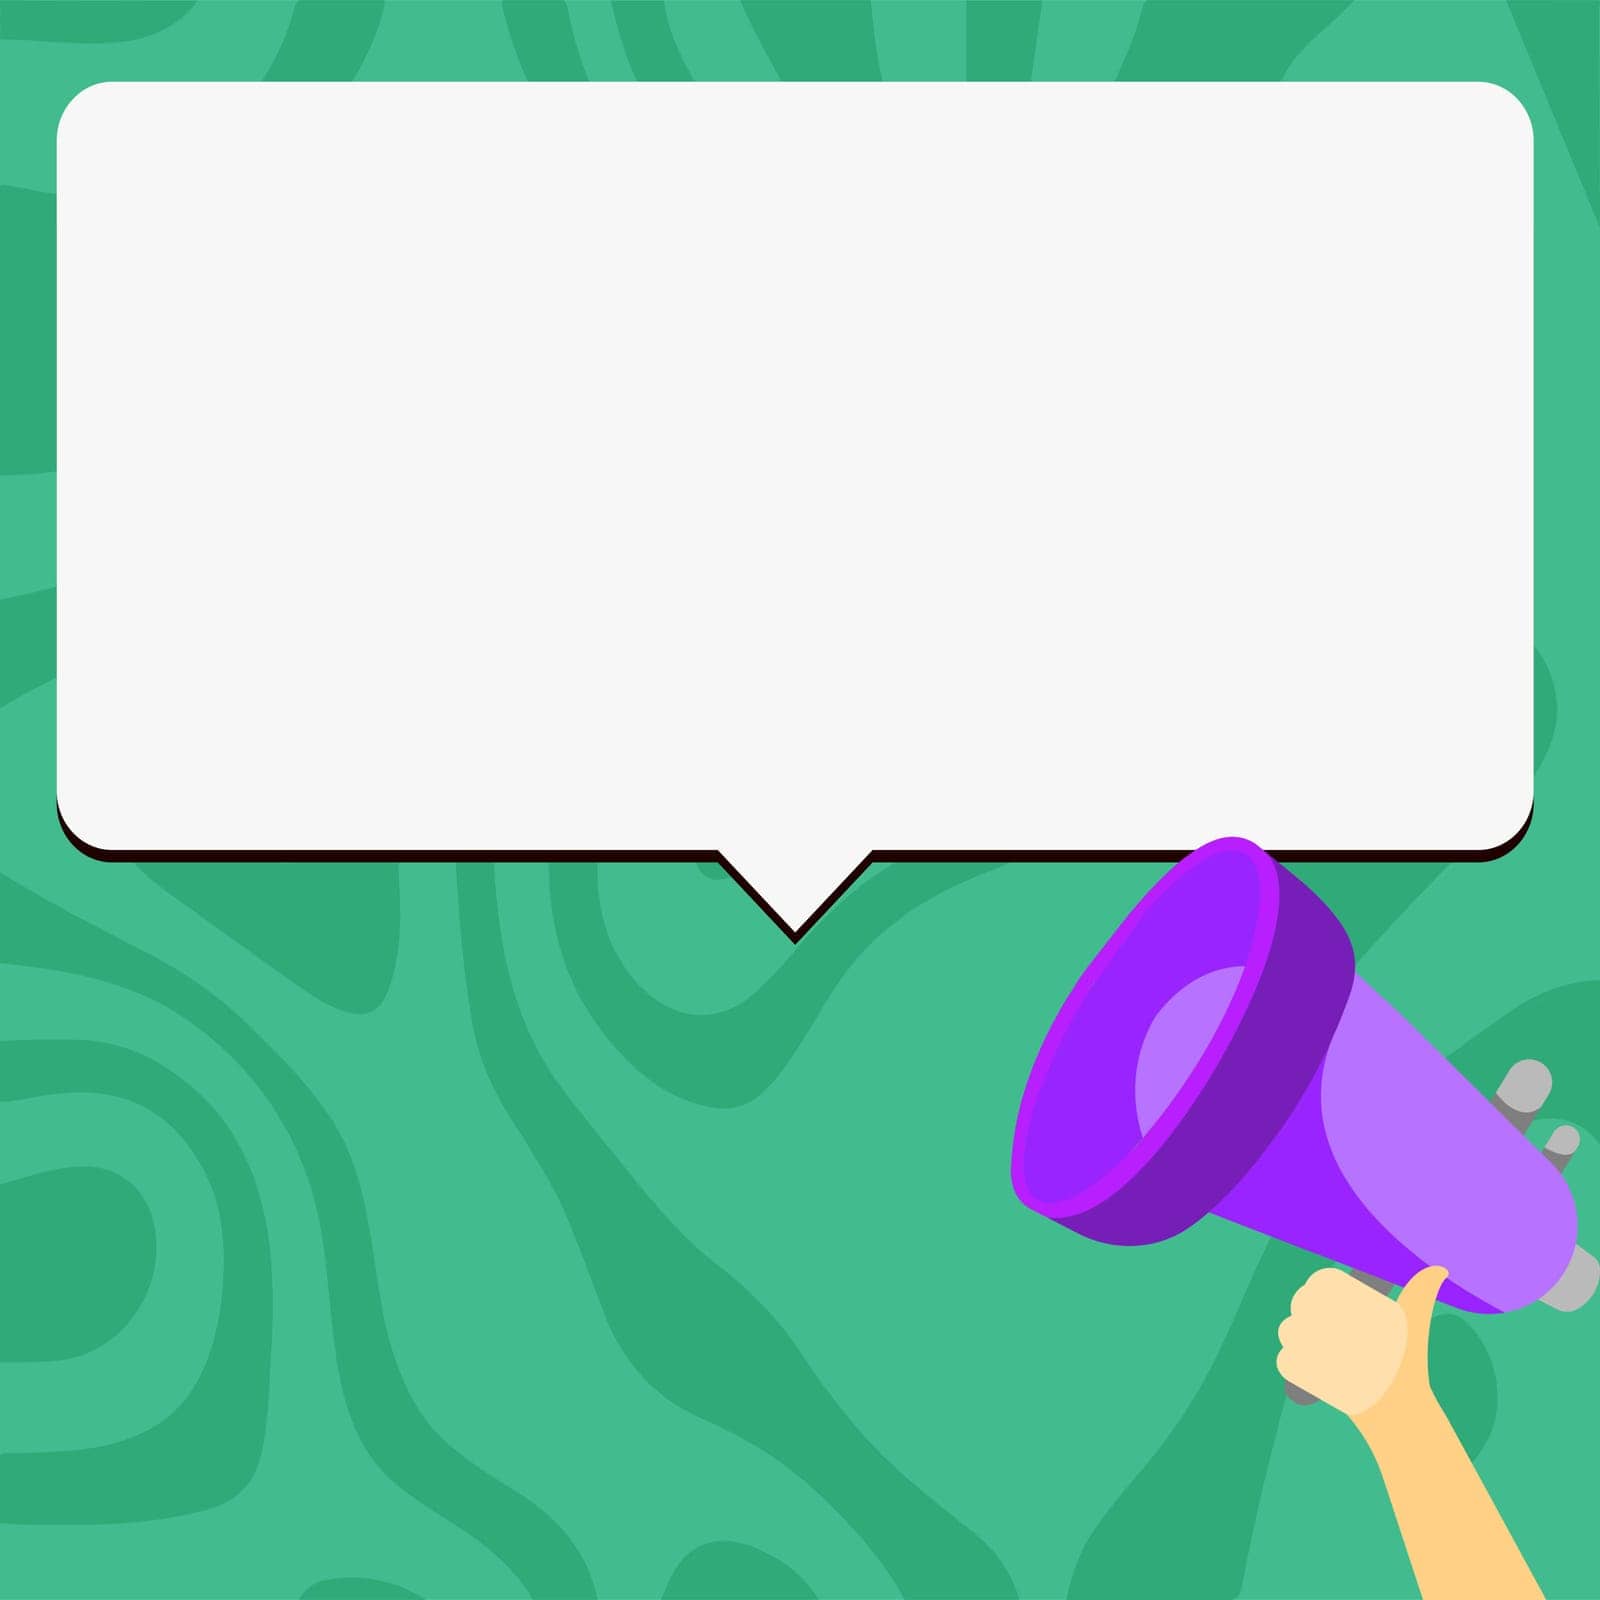 Megaphone In Hand Voice Device With Speech Bubble Presenting Important Brand New Messages. Bullhorn Drawing With Dialog Balloon Showing Announcement. by nialowwa